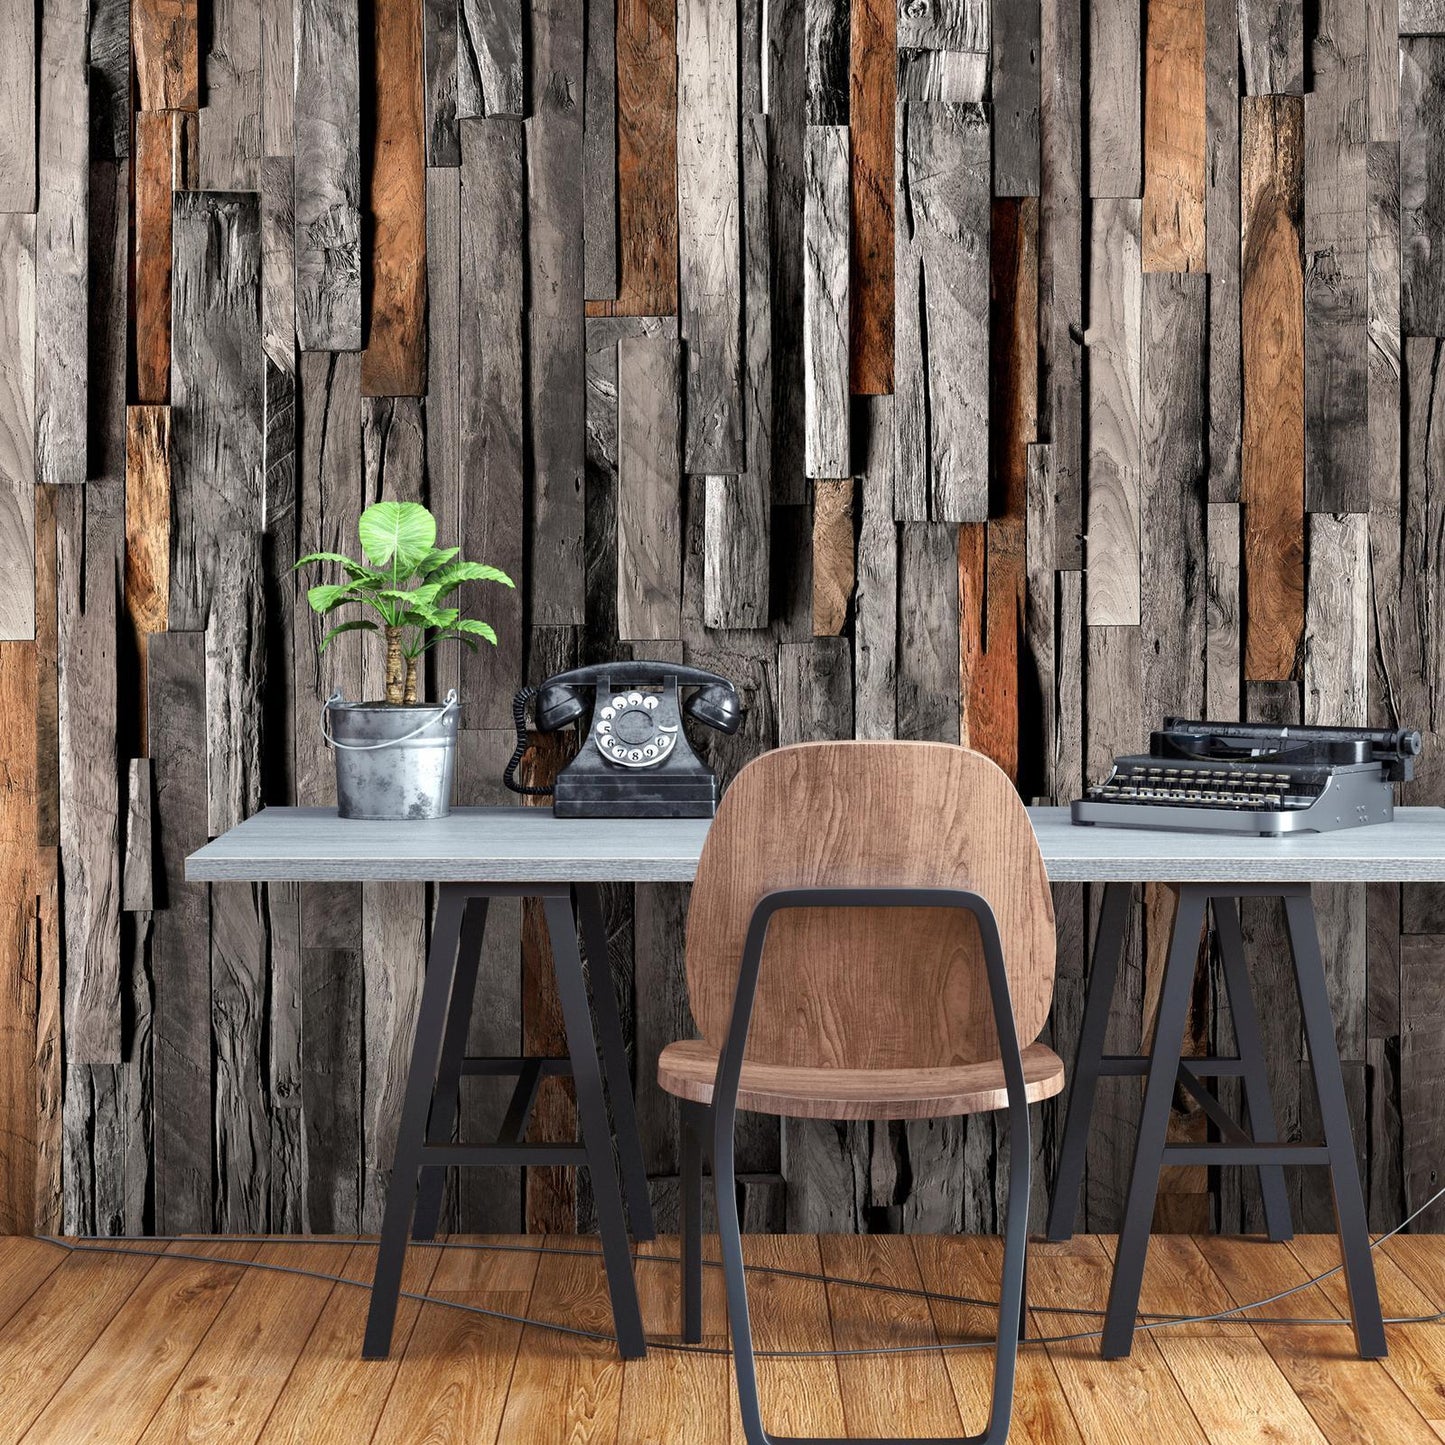 Self-adhesive photo wallpaper - Wooden Curtain (Grey and Brown)